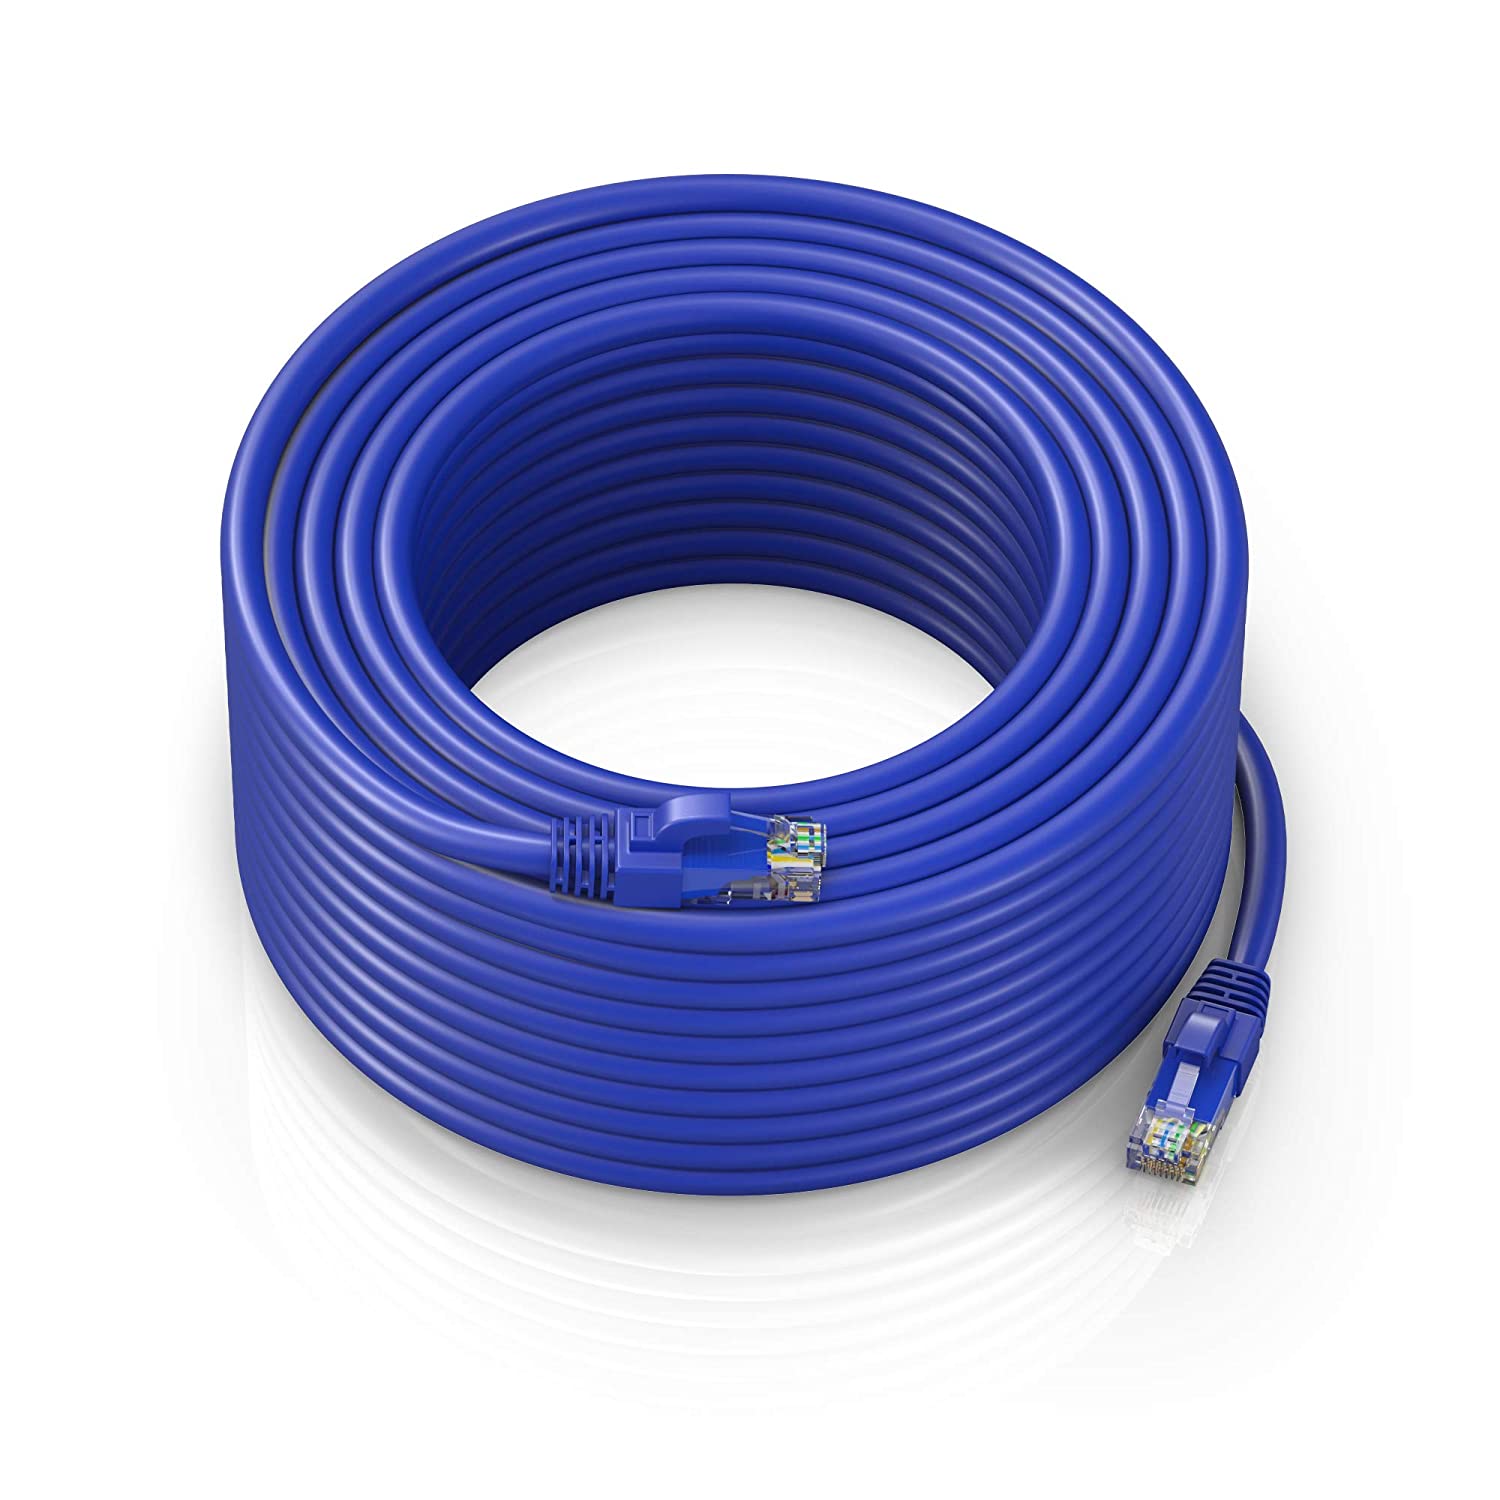 Ethernet Cable 300 ft CAT6 High Speed Internet Network LAN Patch Cable Cord  (300 feet, Blue)